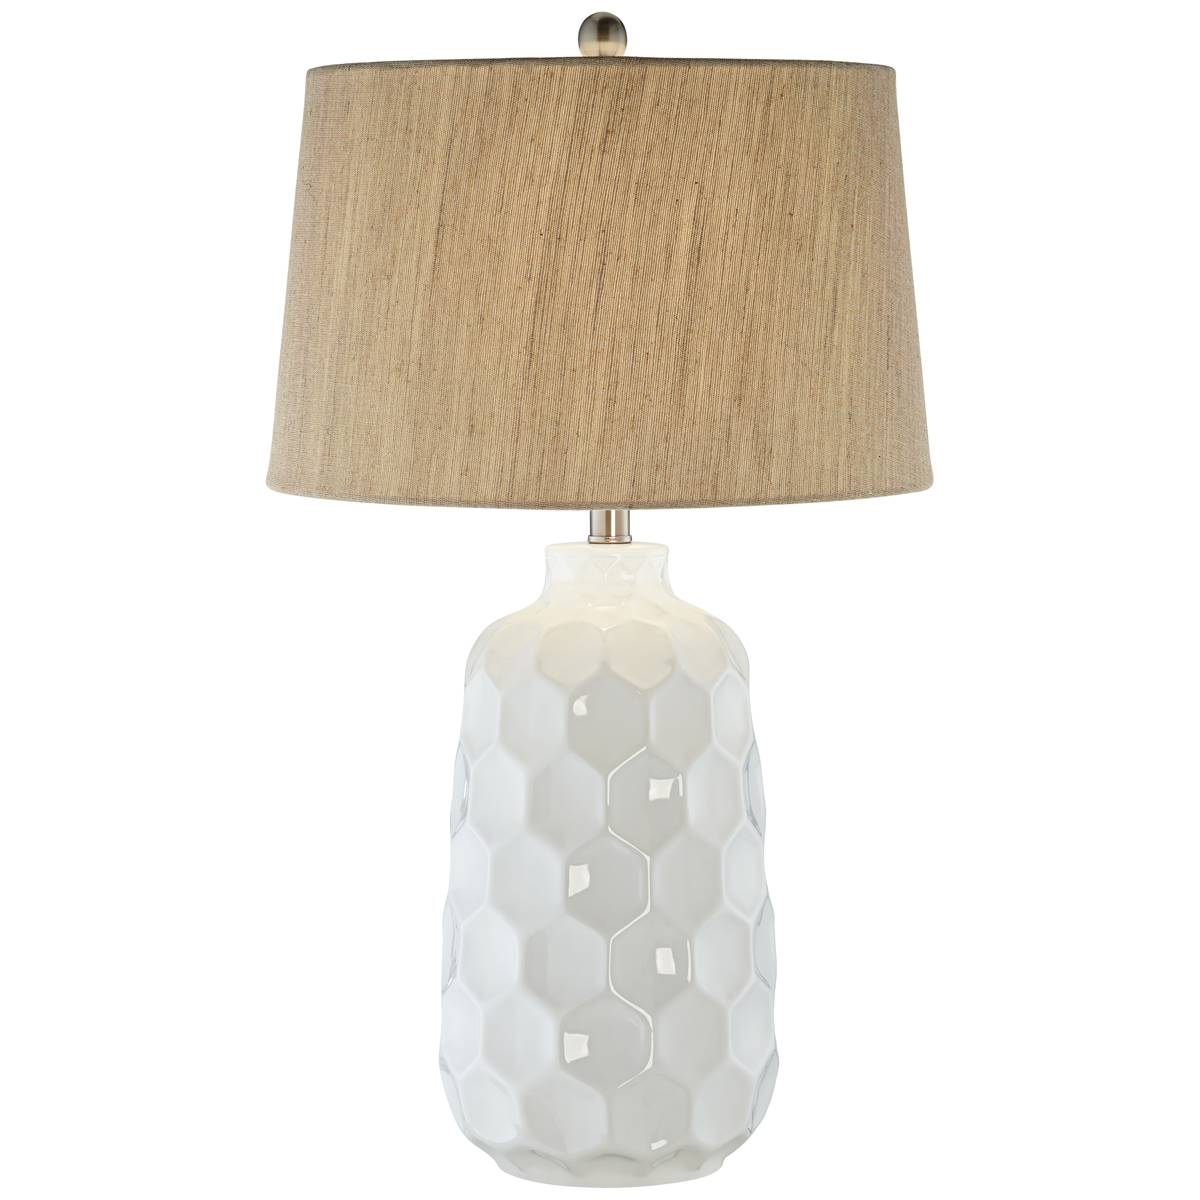 Pacific Coast Lighting Honeycomb Dreams 29in. White Table Lamp